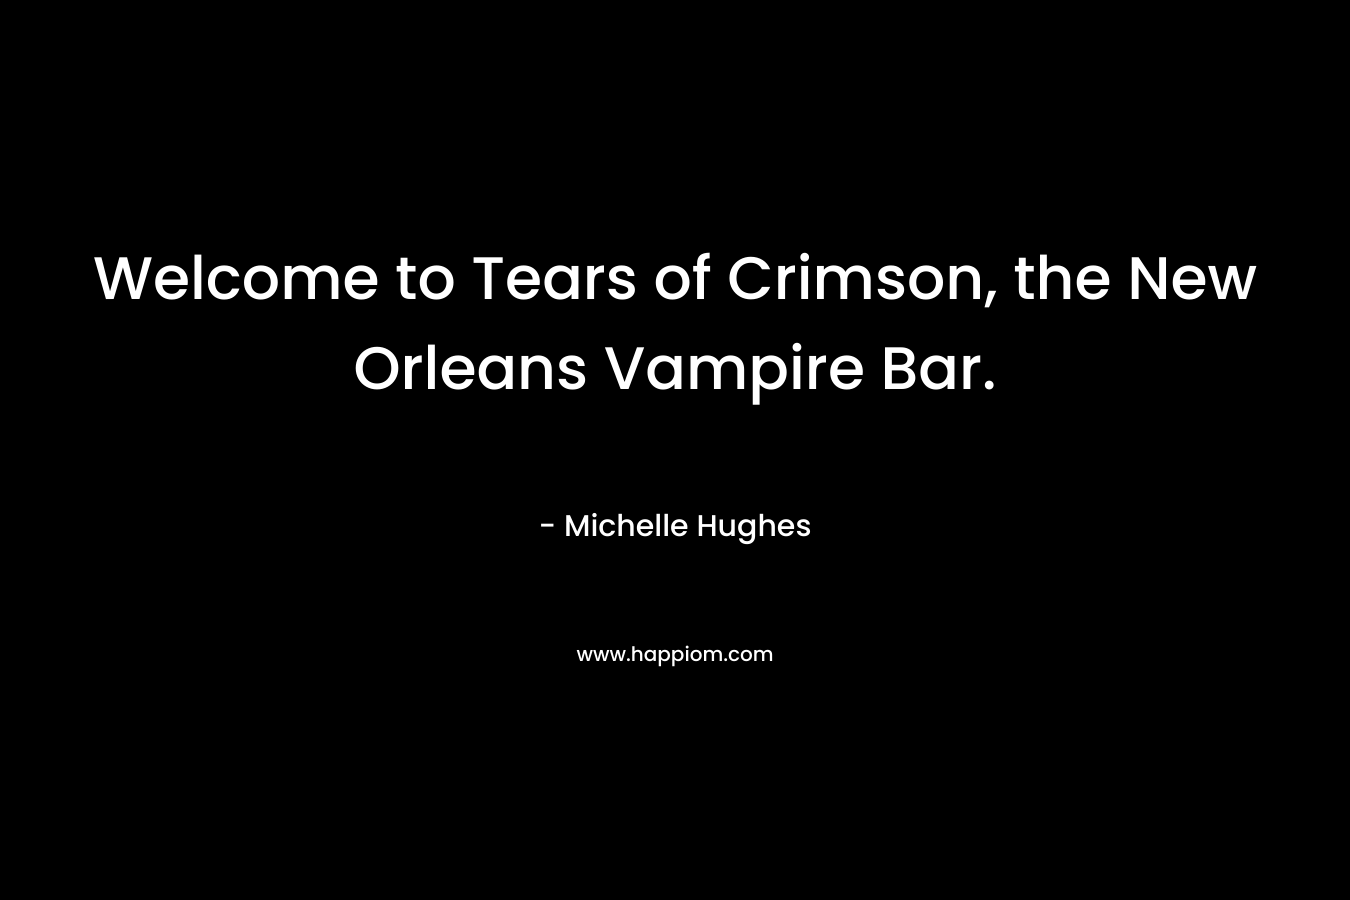 Welcome to Tears of Crimson, the New Orleans Vampire Bar.